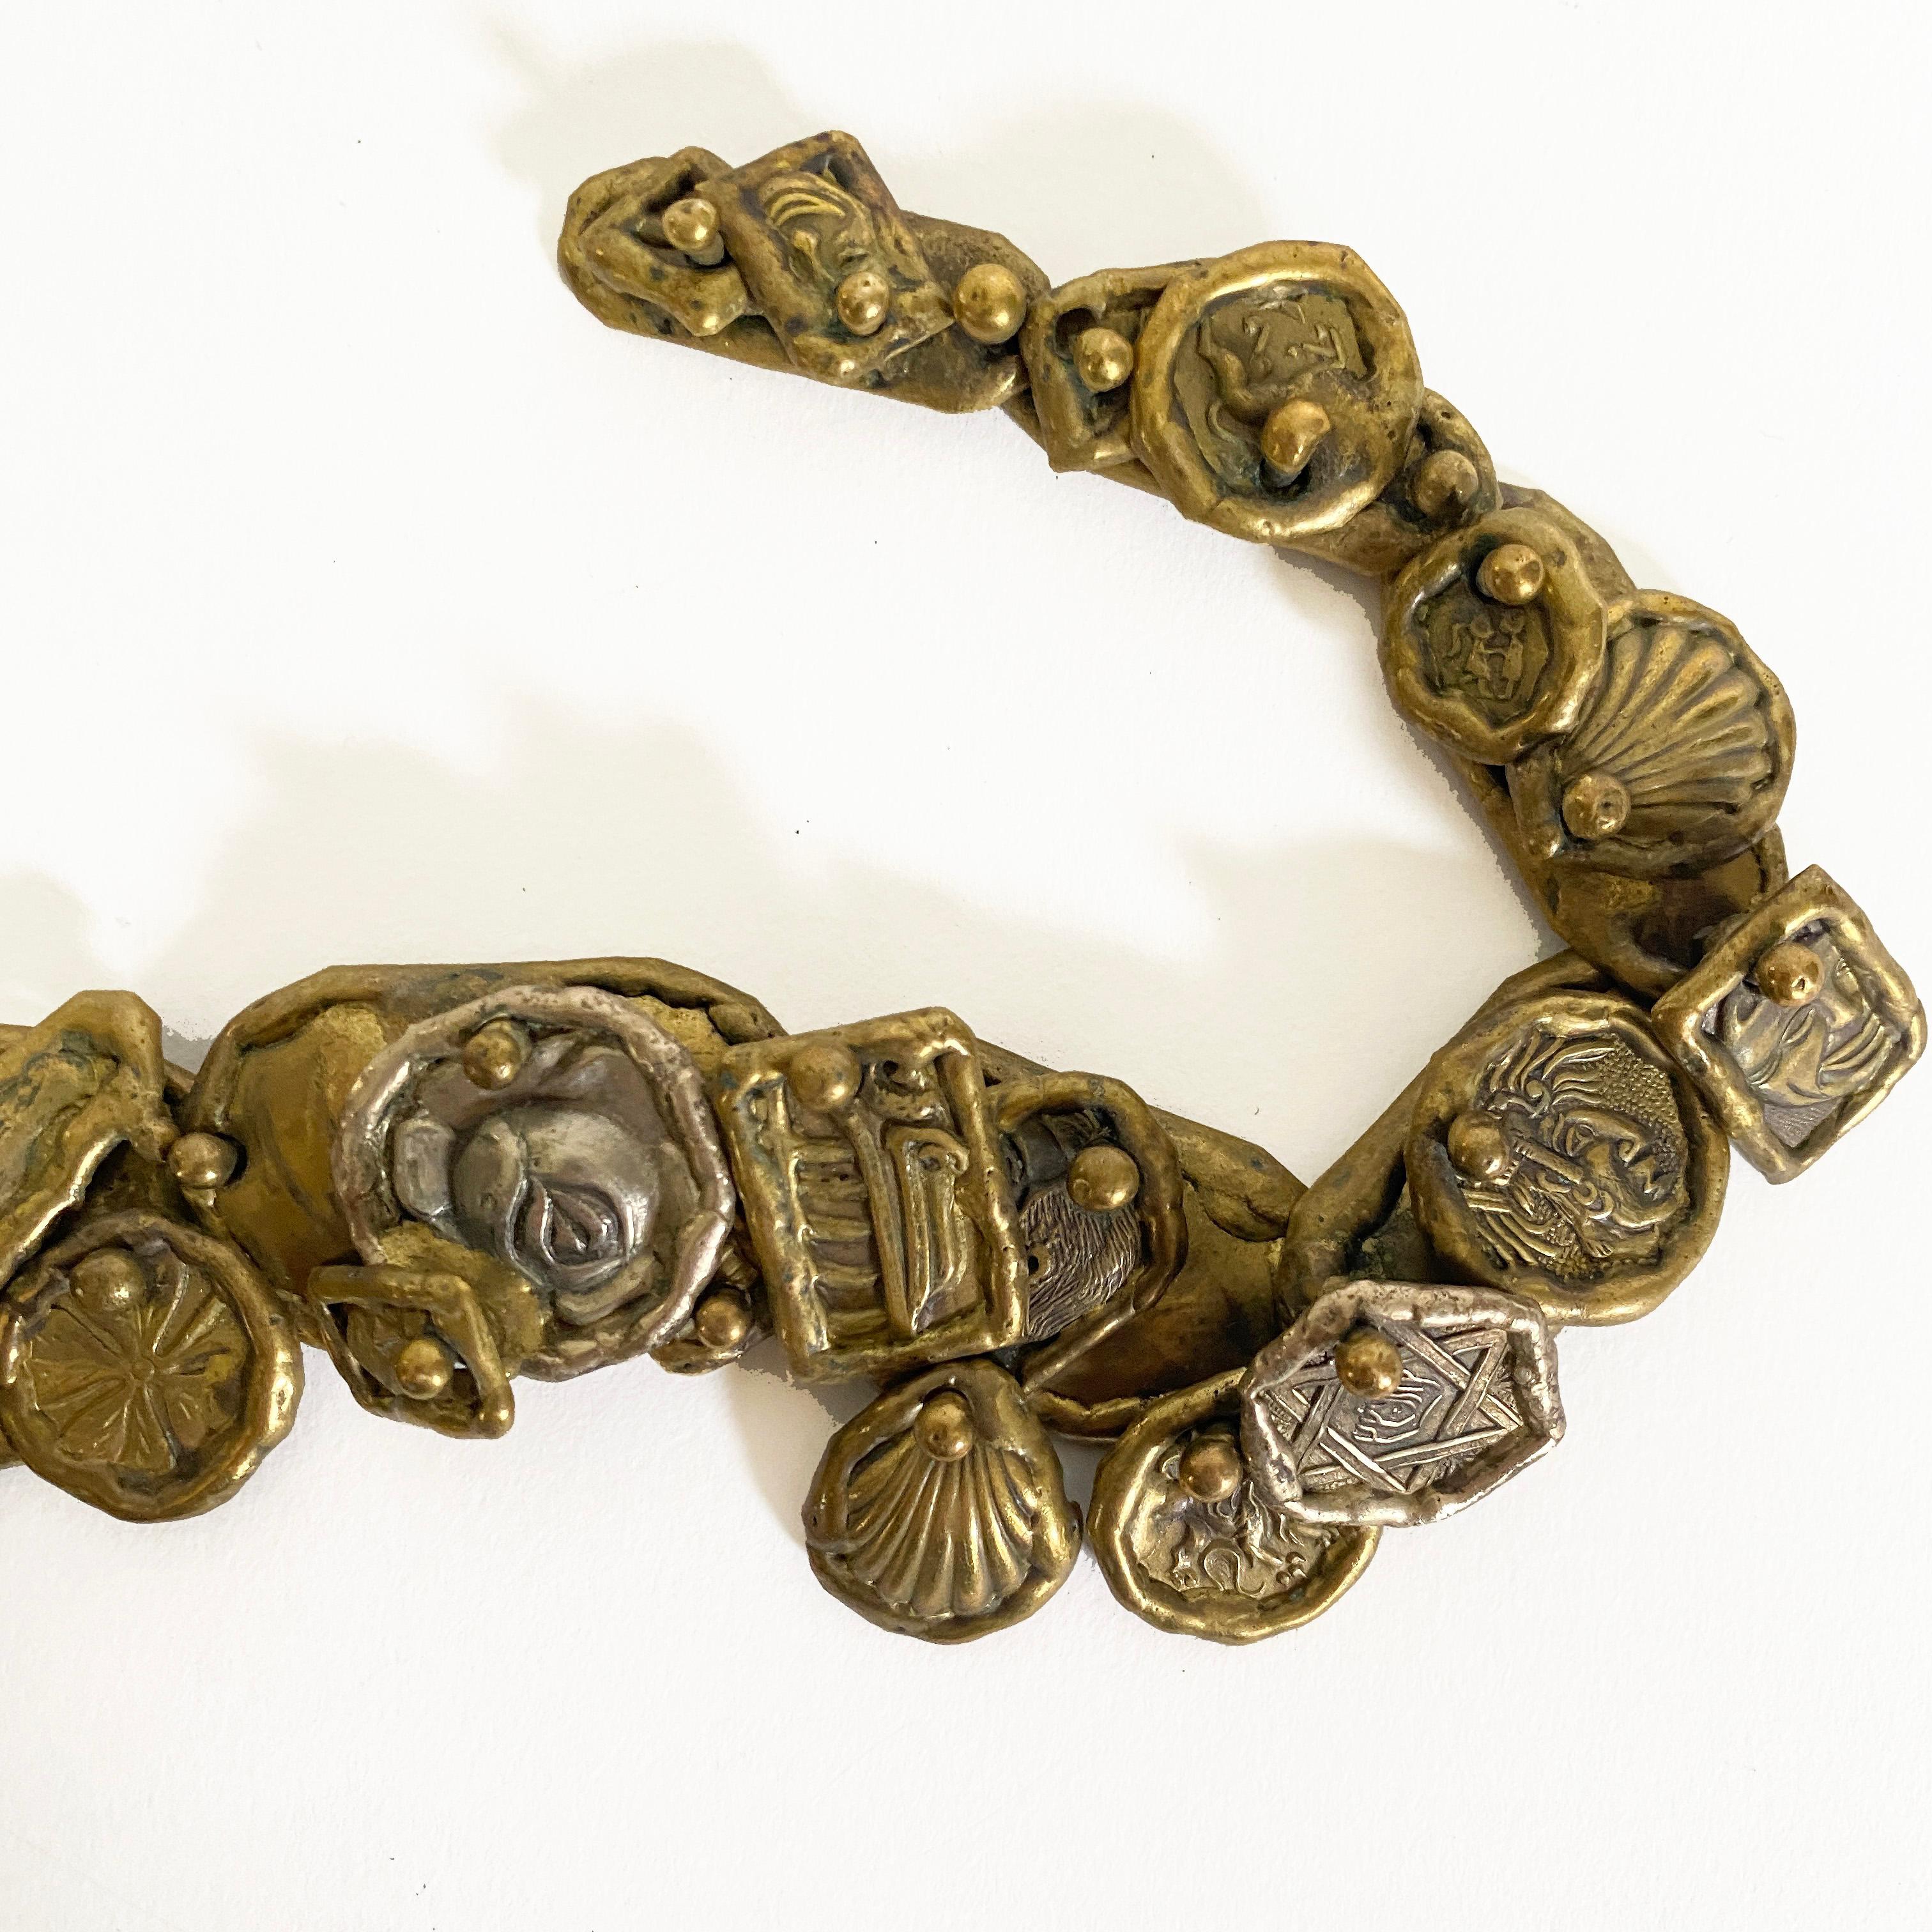 Vintage Pal Kepenyes bronze/brass necklace, 20th century. 

This Hungarian born artist worked in Mexico for decades, known for free-form sculptural jewelry. Faces, insects and what-nots make up the figurative detail of this necklace. His signature